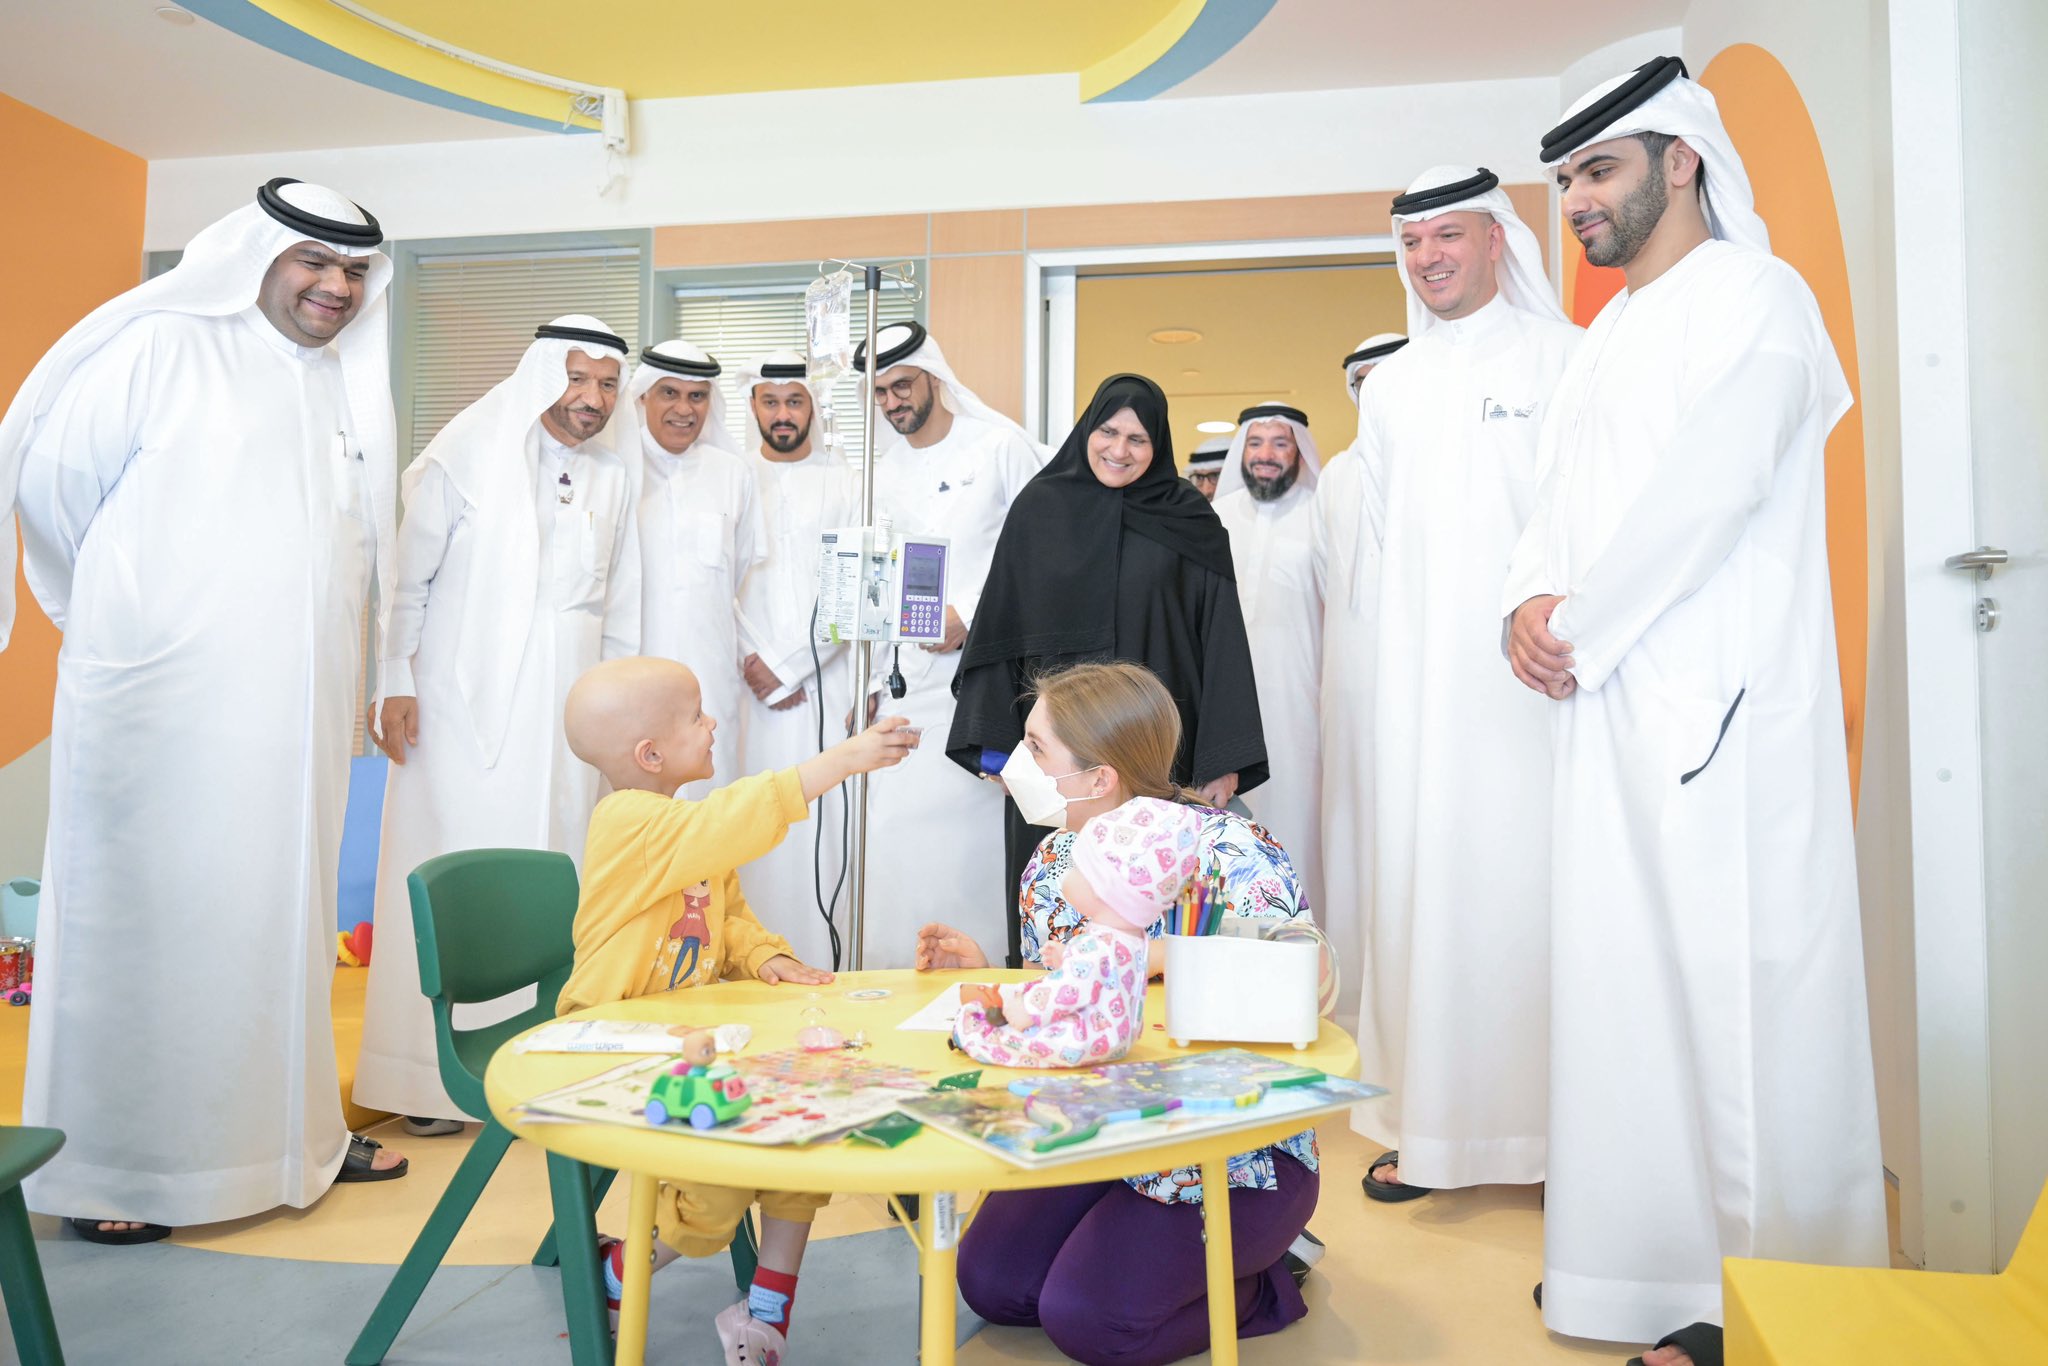 Dubai Health announces the launch of ‘The Child Fund’ by Al Jalila Foundation